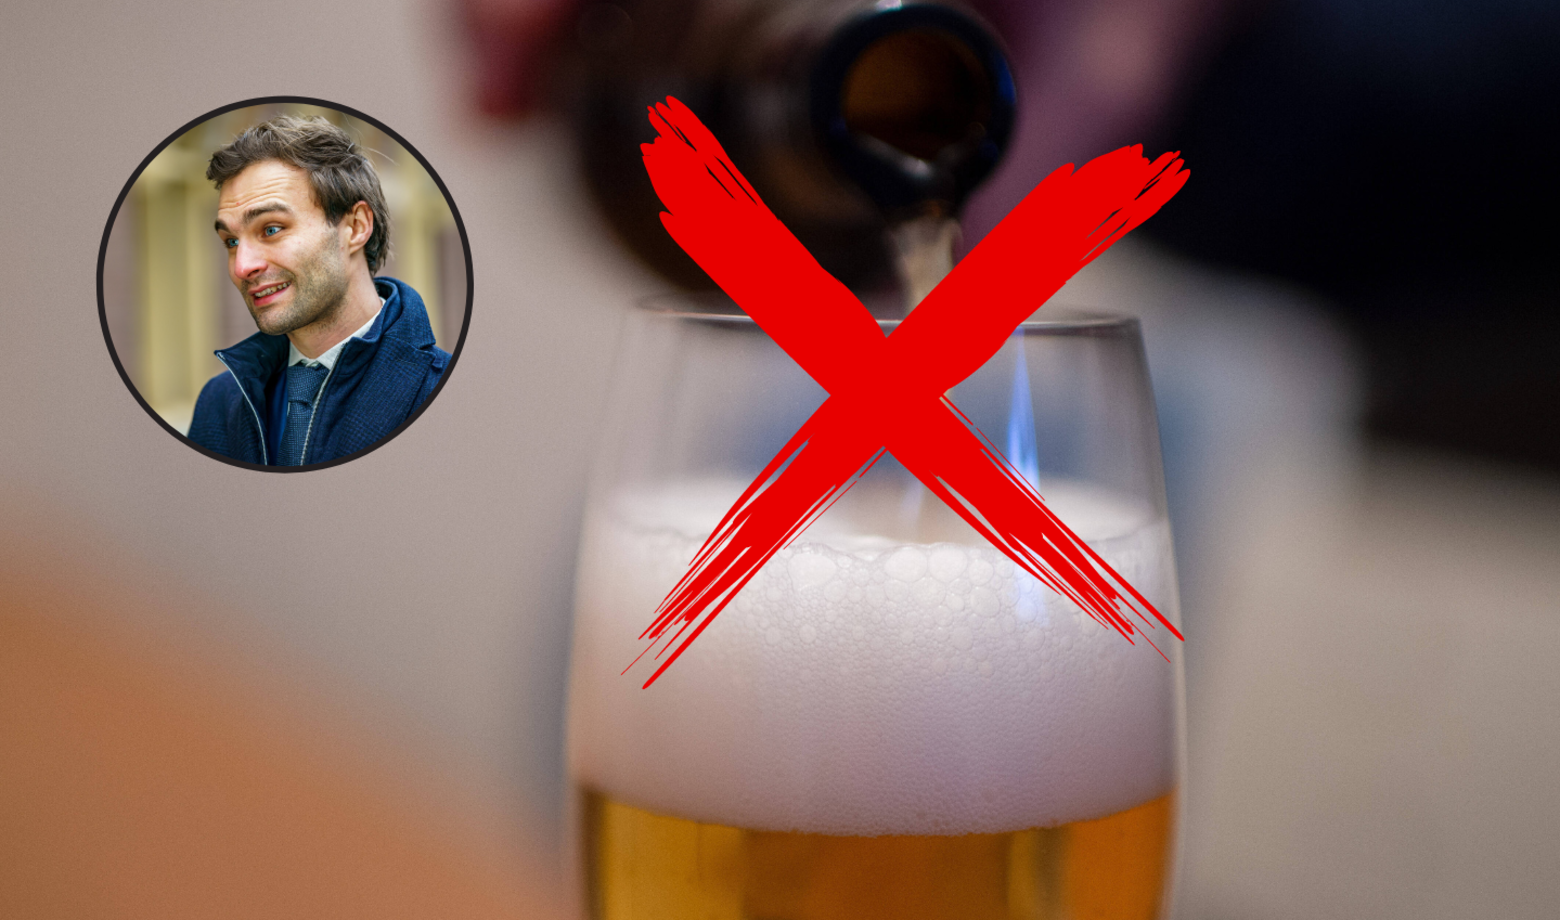 The Council of Ministers is considering banning alcoholic beverages in sports canteens through a preventive agreement